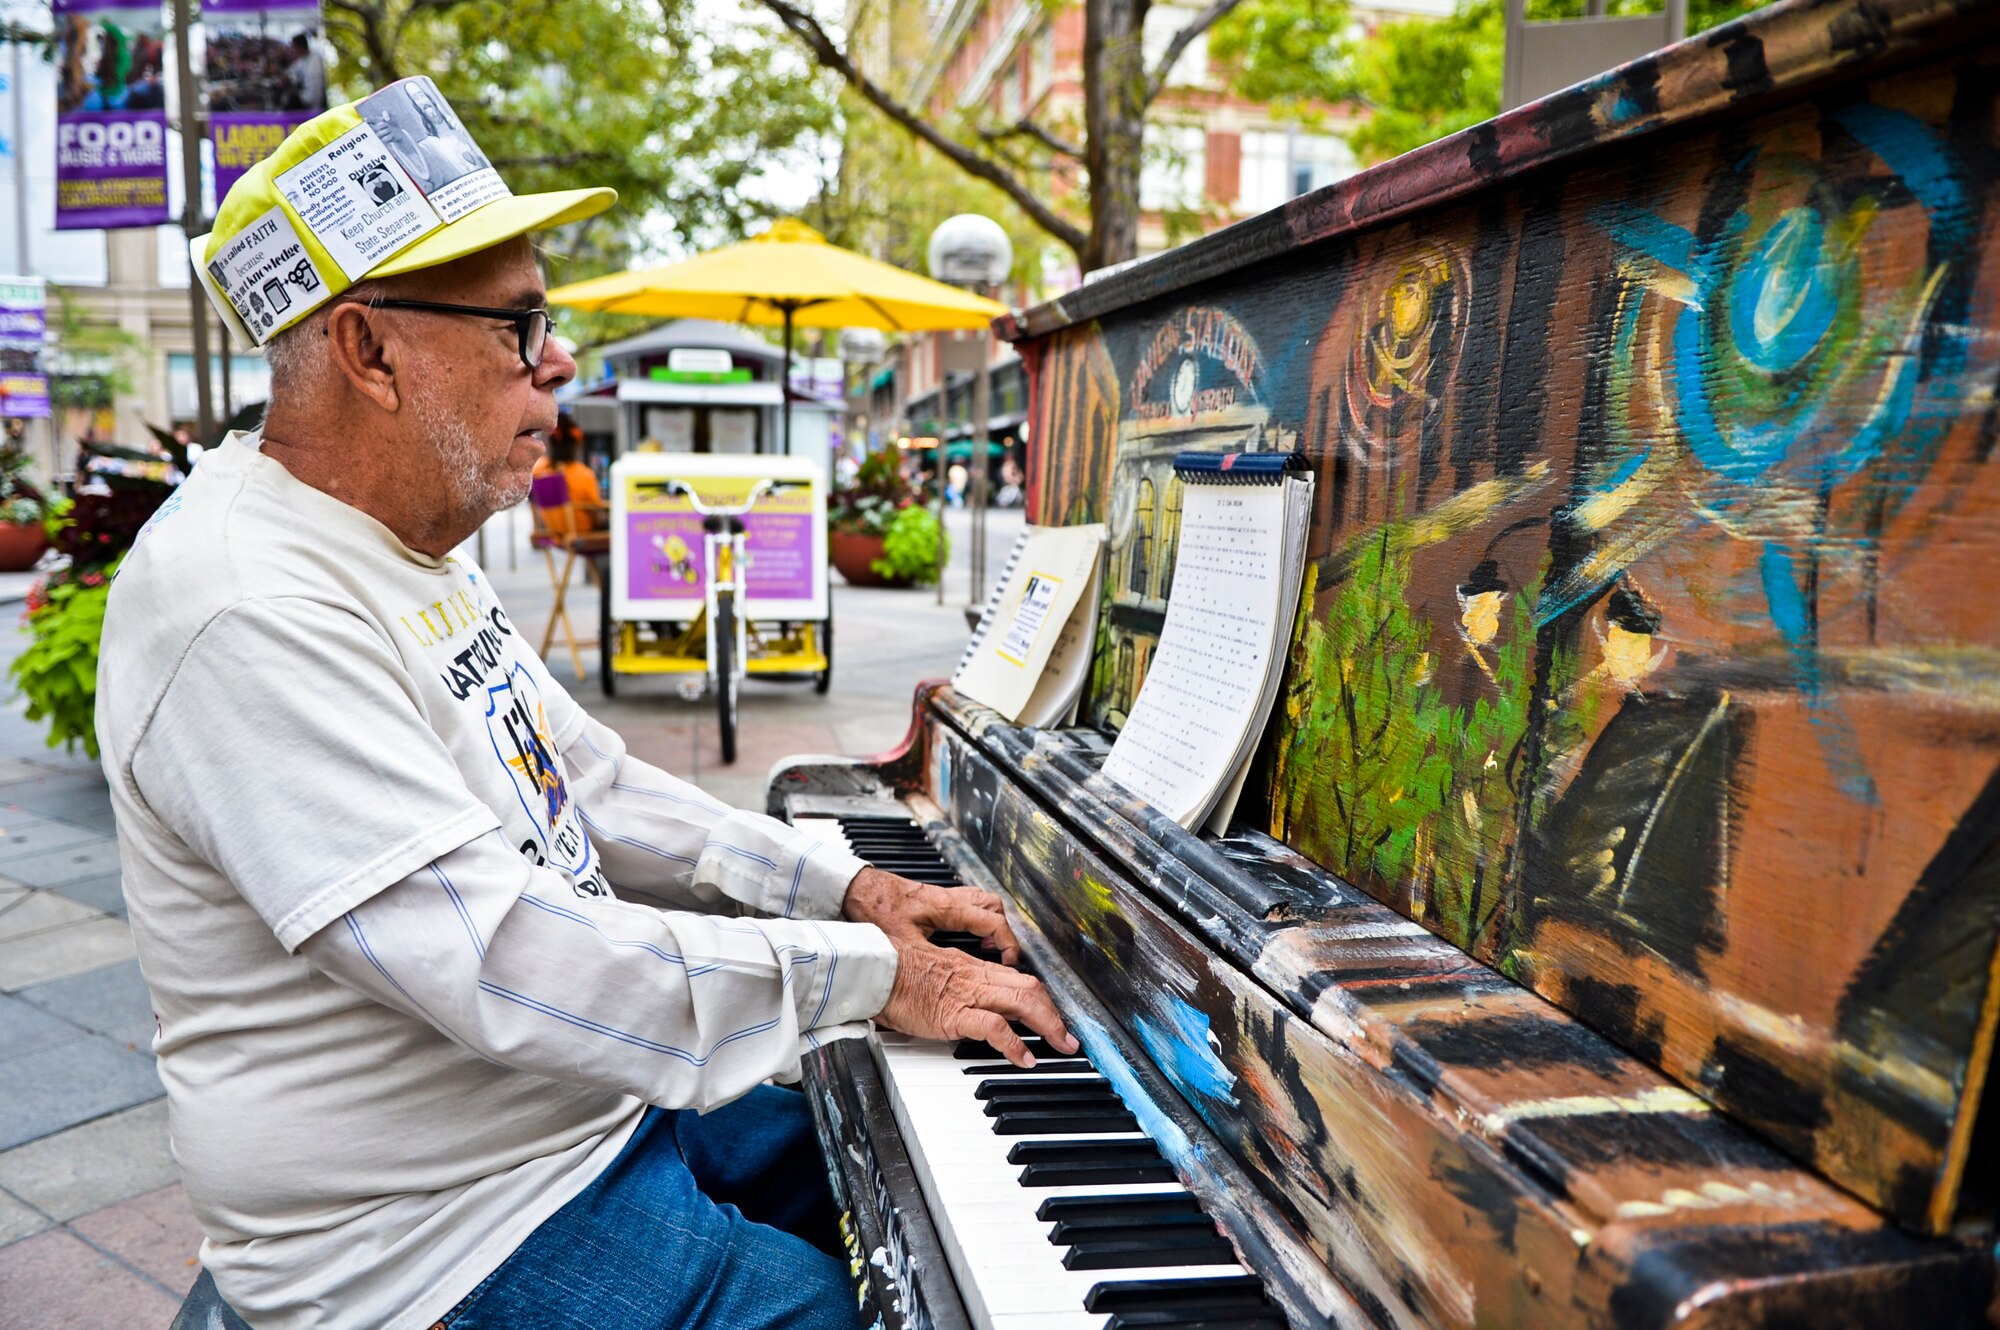 DENVER -- Richard Grimes plays a tune on one of the many pianos open for use to everyone in the downtown Denver area on Aug. 23, 2012. All along the 16th Street Mall shopping area there are many free attraction open to public use such as chess boards. (U.S. Air Force photo by Paul Labbe)